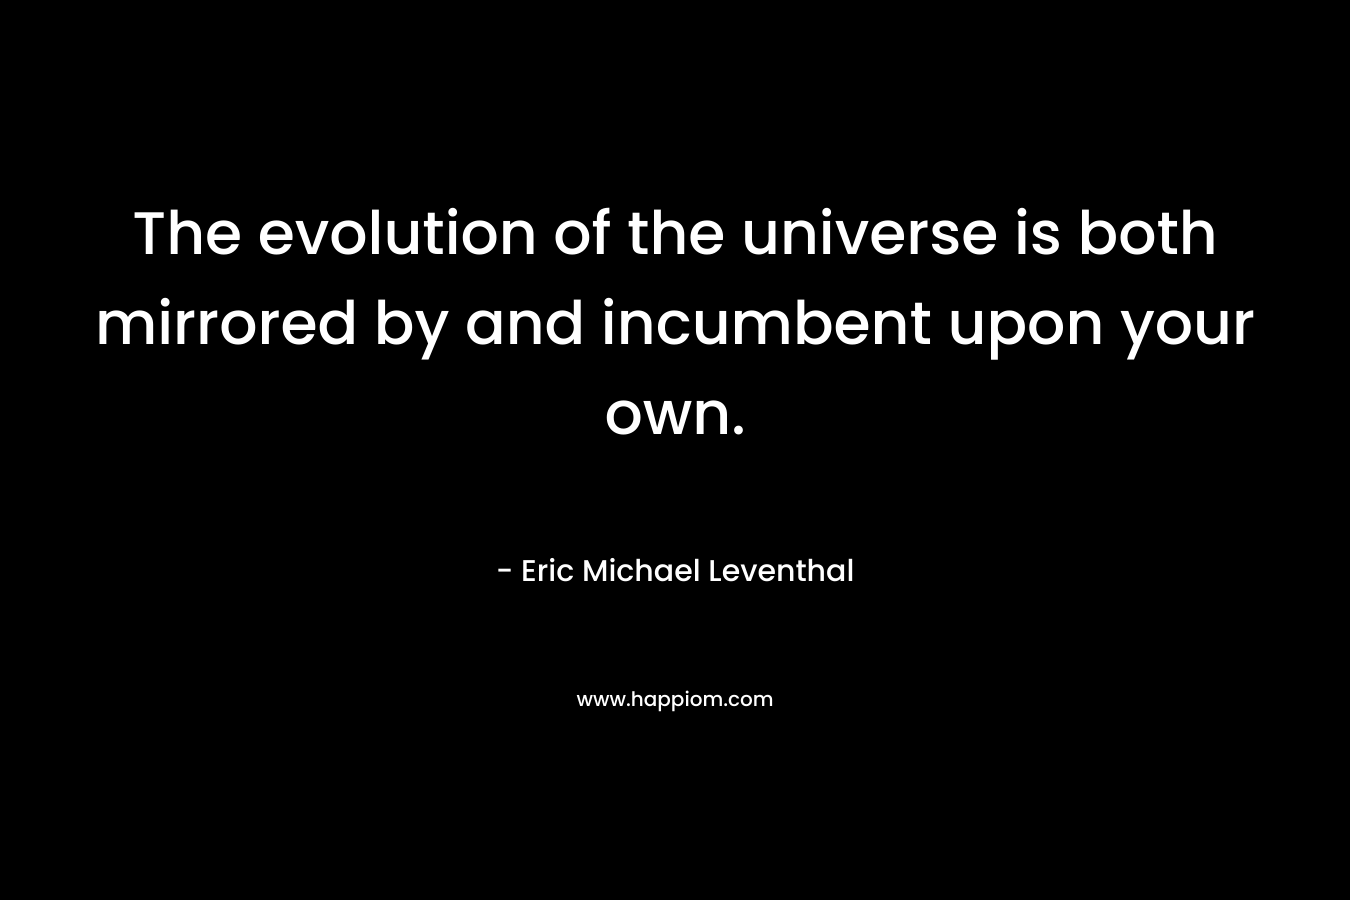 The evolution of the universe is both mirrored by and incumbent upon your own. – Eric Michael Leventhal